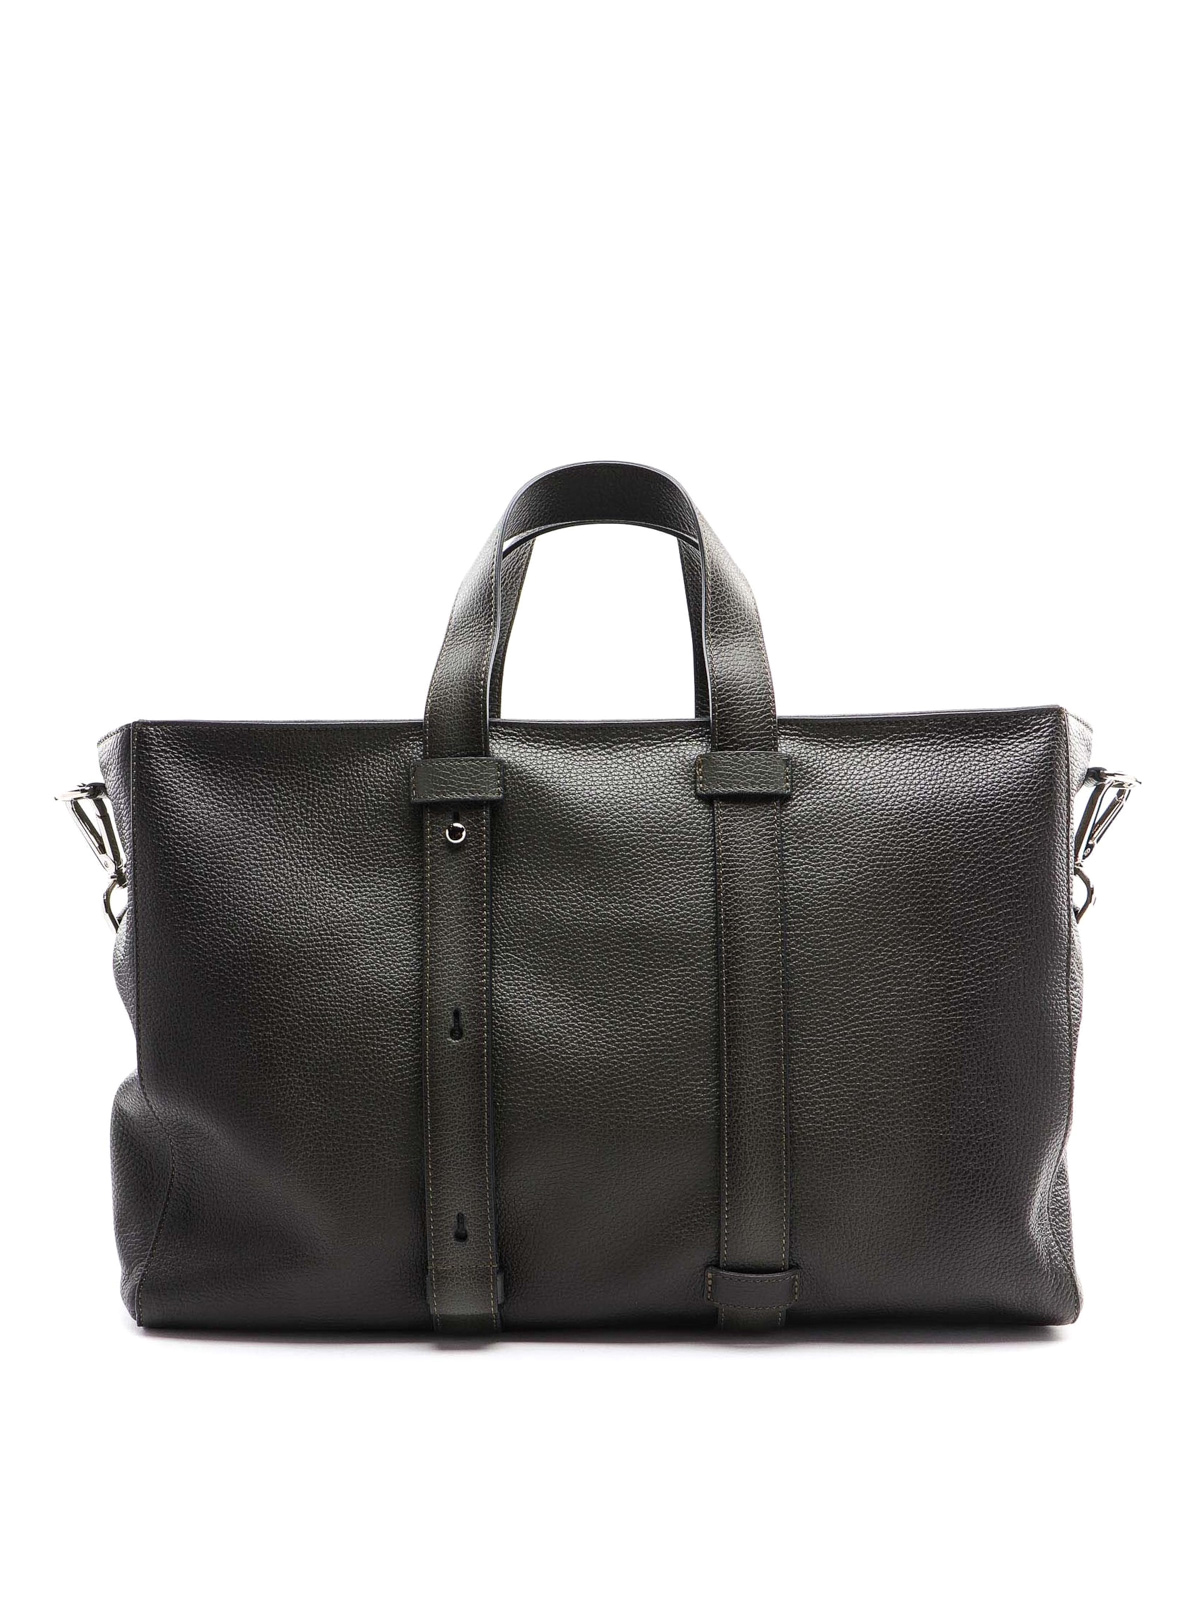 ORCIANI MICRON DEEP GRADIENT LEATHER TOTE BAG